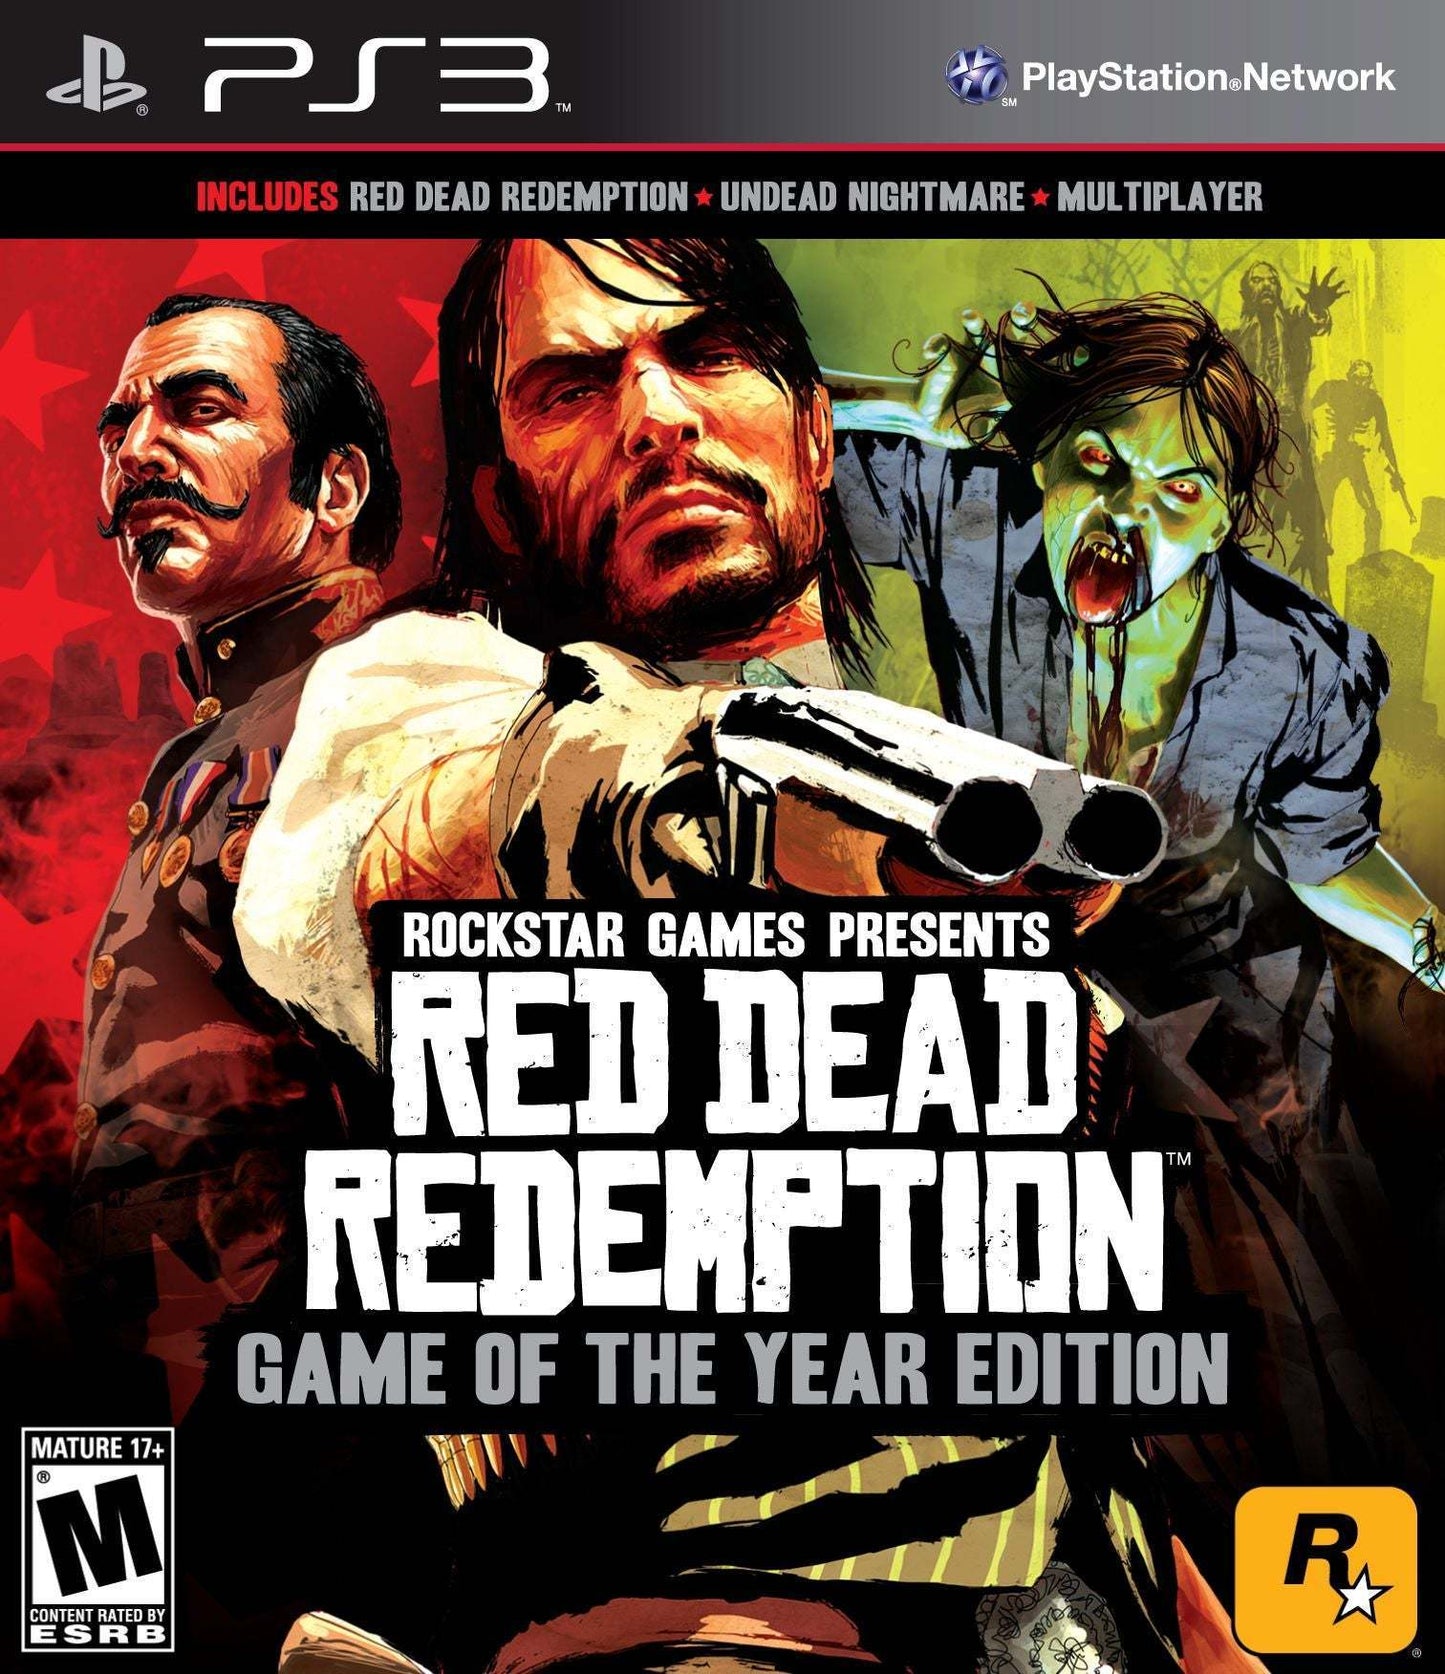 Red Dead Redemption: Game of the Year Edition (Playstation 3)